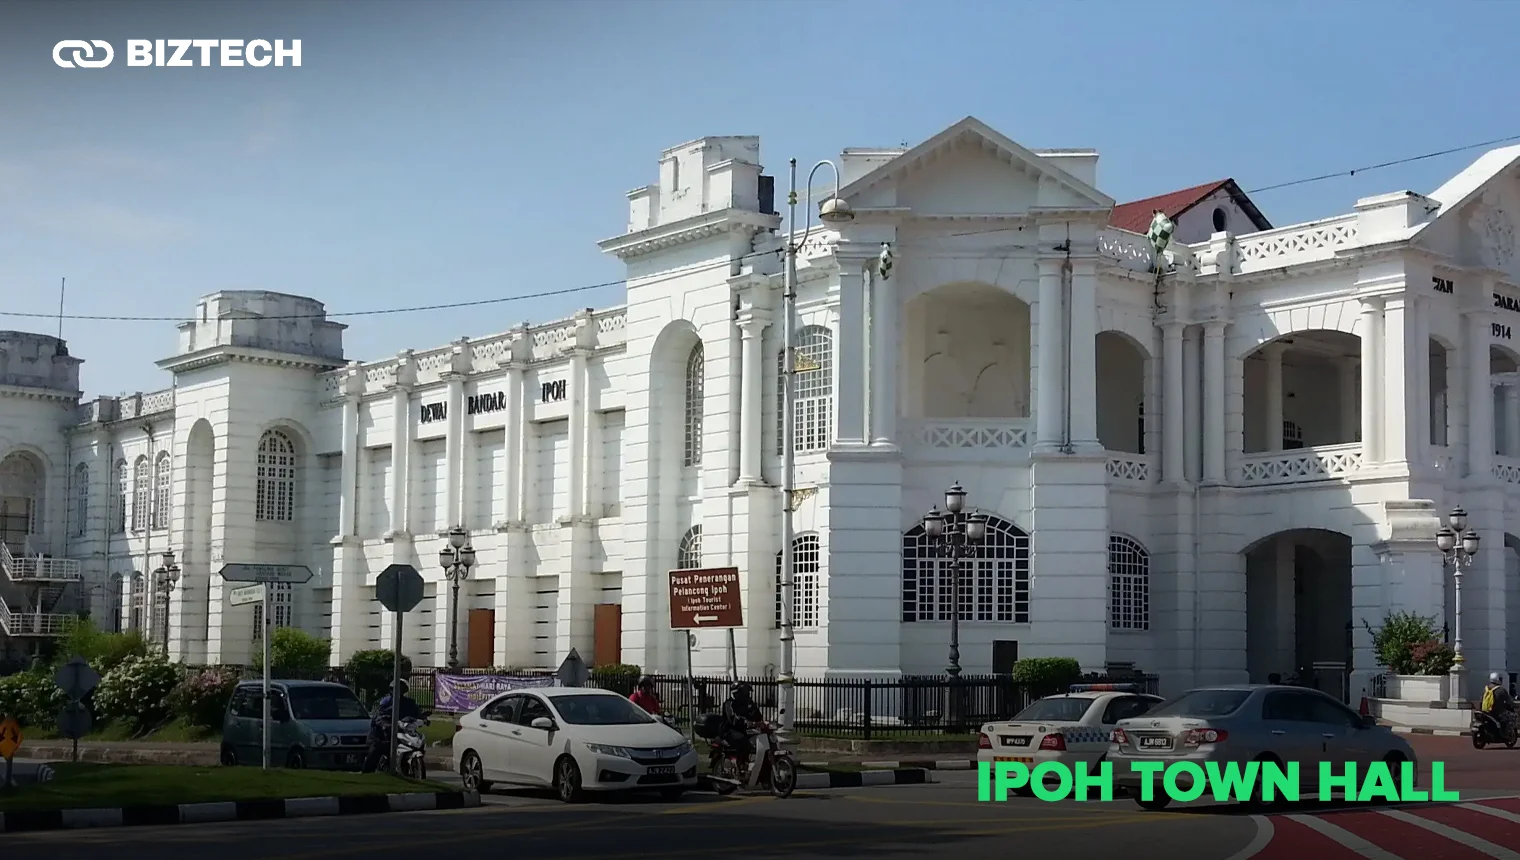 Ipoh town hall